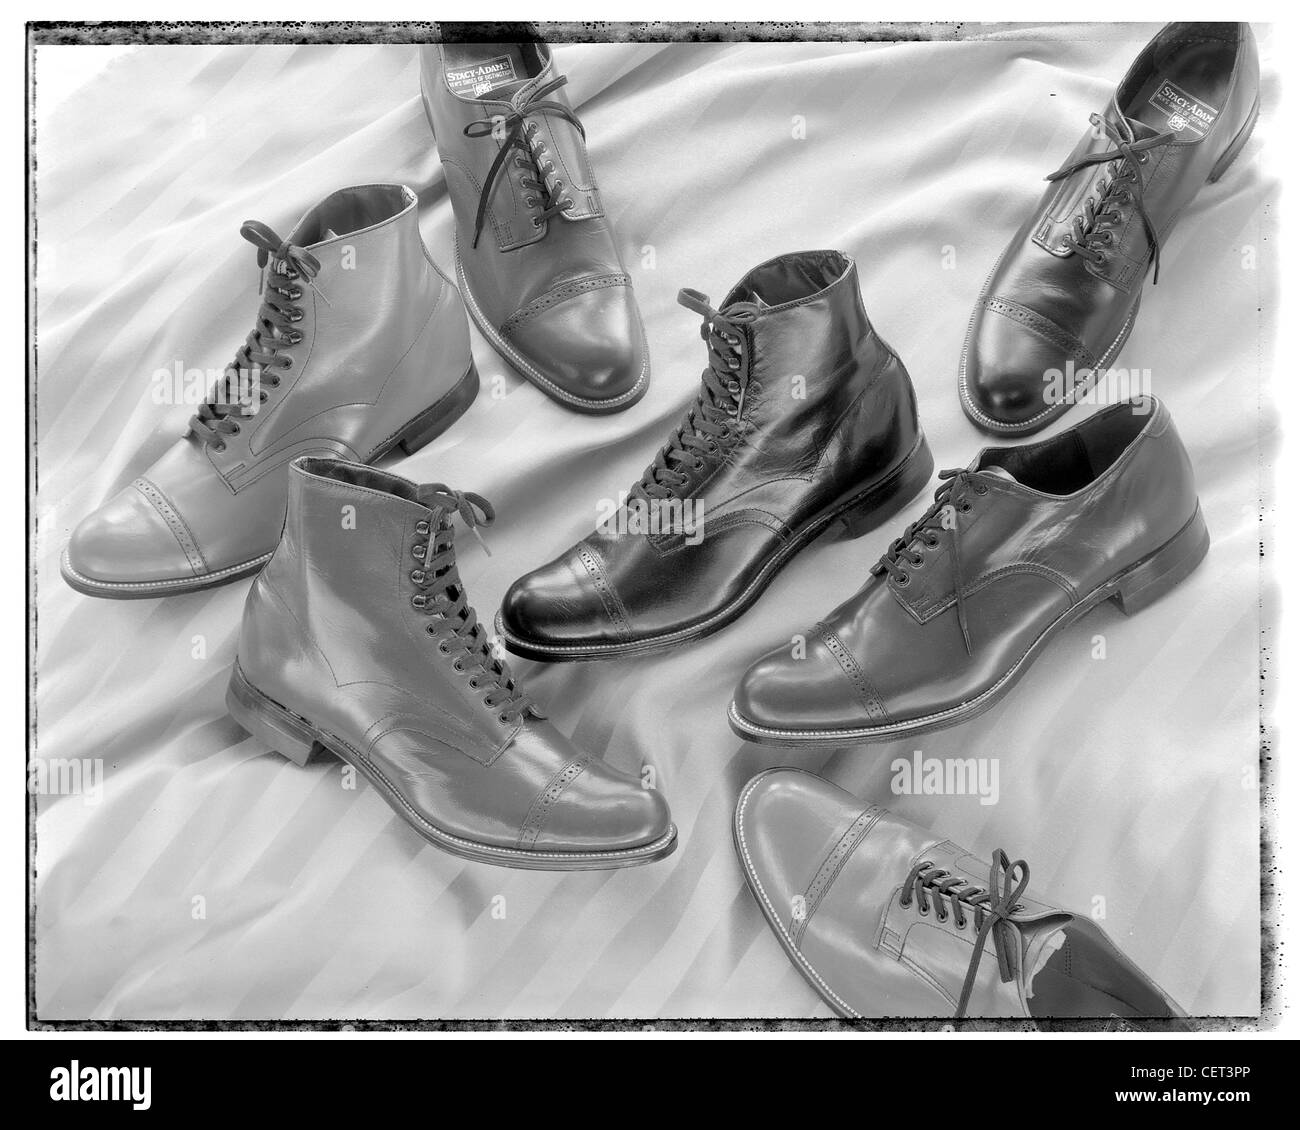 Stacey Adams Shoes, retro, design style group still life on material background.  boots, shoes, laces  classic horizontal Stock Photo